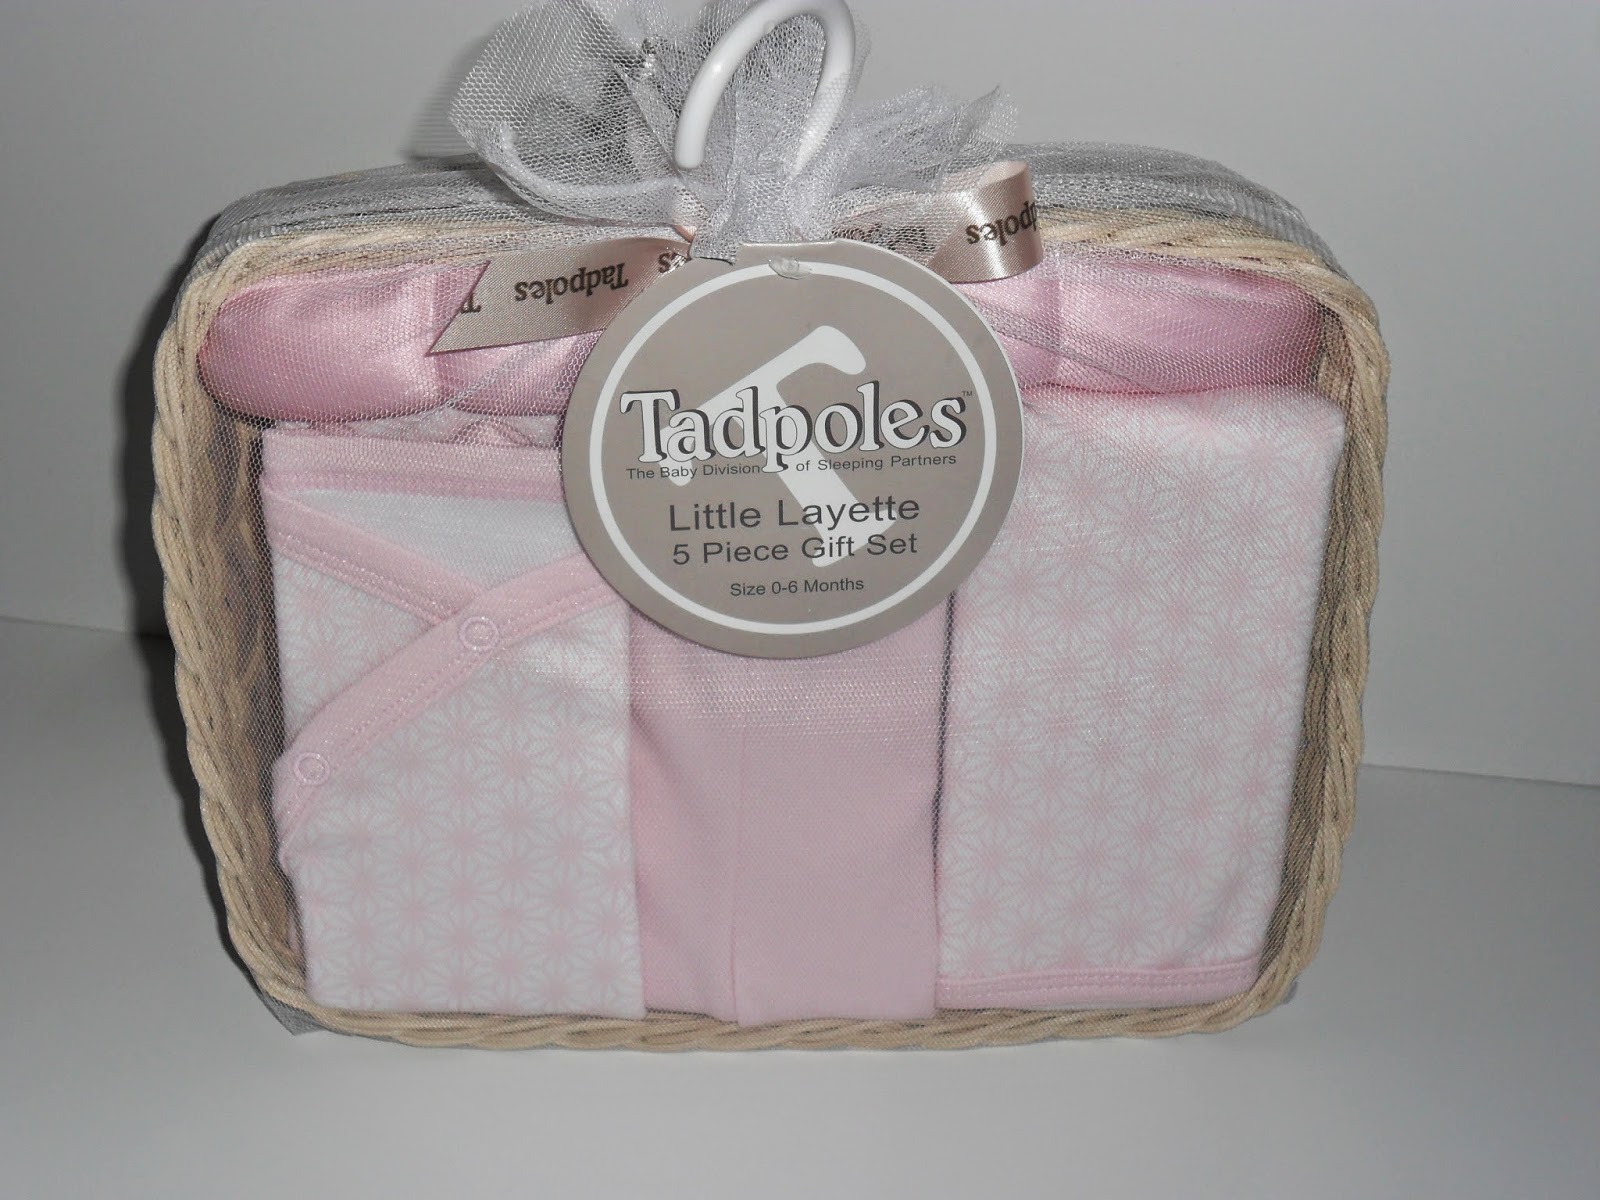 Tadpoles Layette Gift Sets. Review (Blu me away or Pink of me Event)